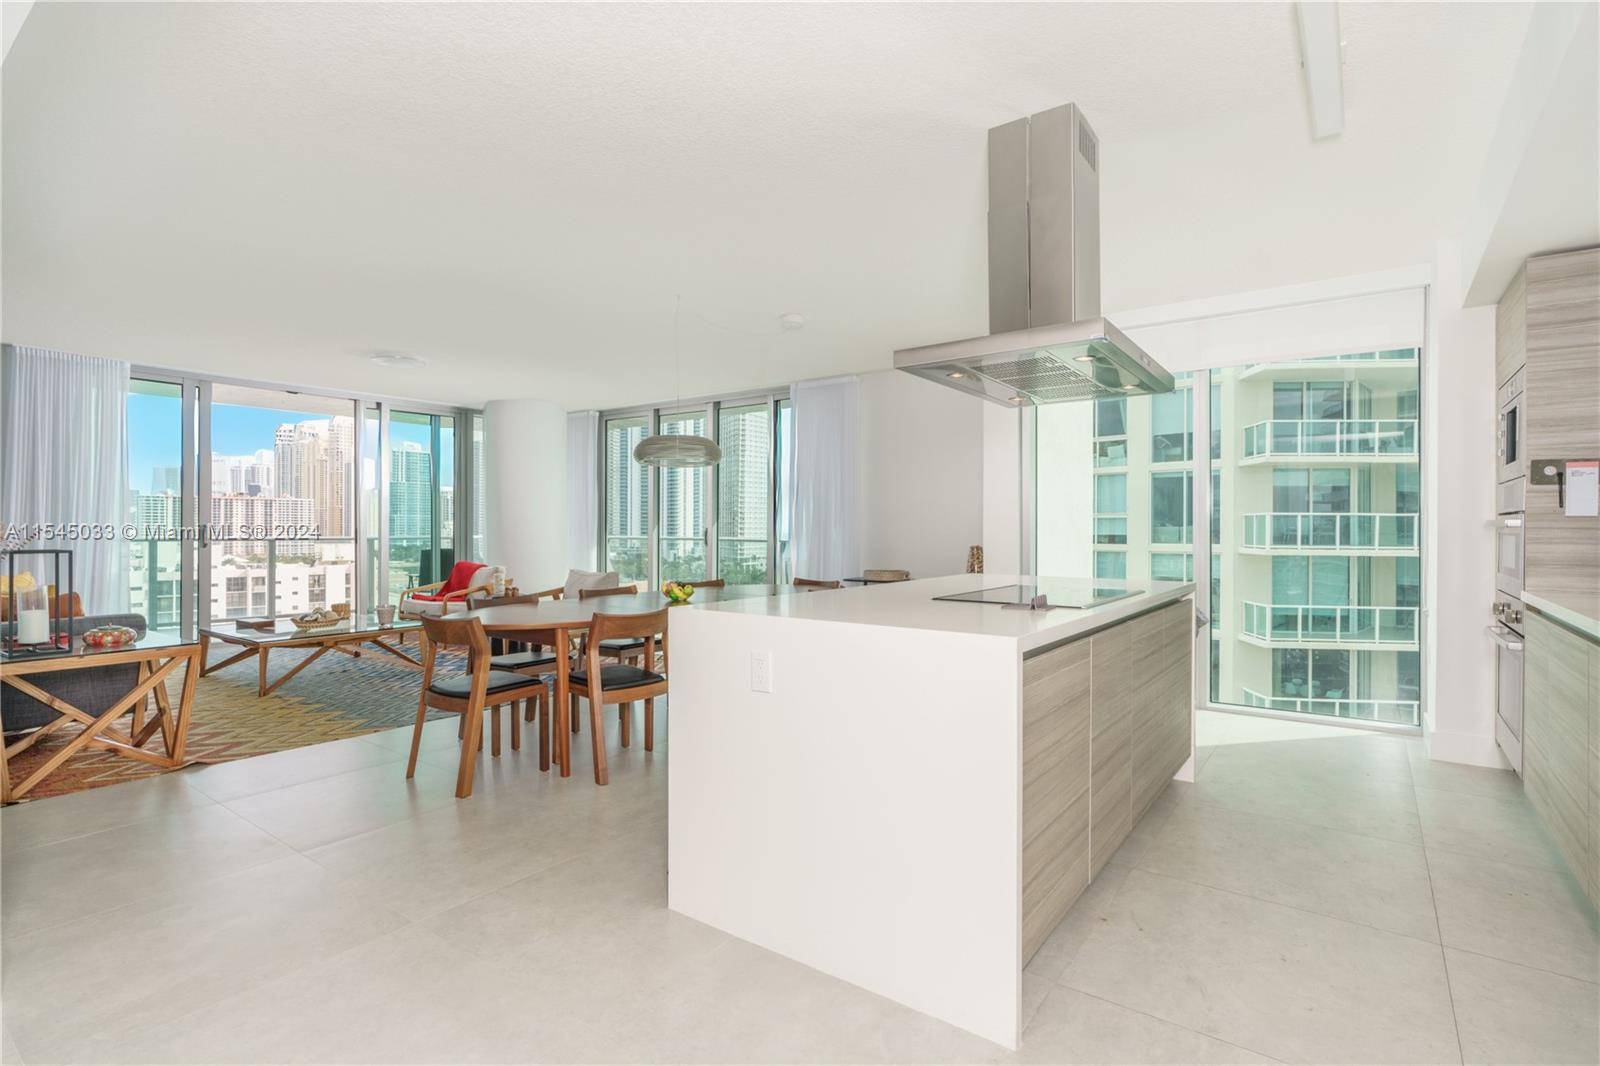 MOTIVATED OWNER ! Panoramic views of Sunny Isles Beach and the Atlantic Ocean from the oversized wrap around balcony of this stunning 3 bedroom ALL SUITES 3.